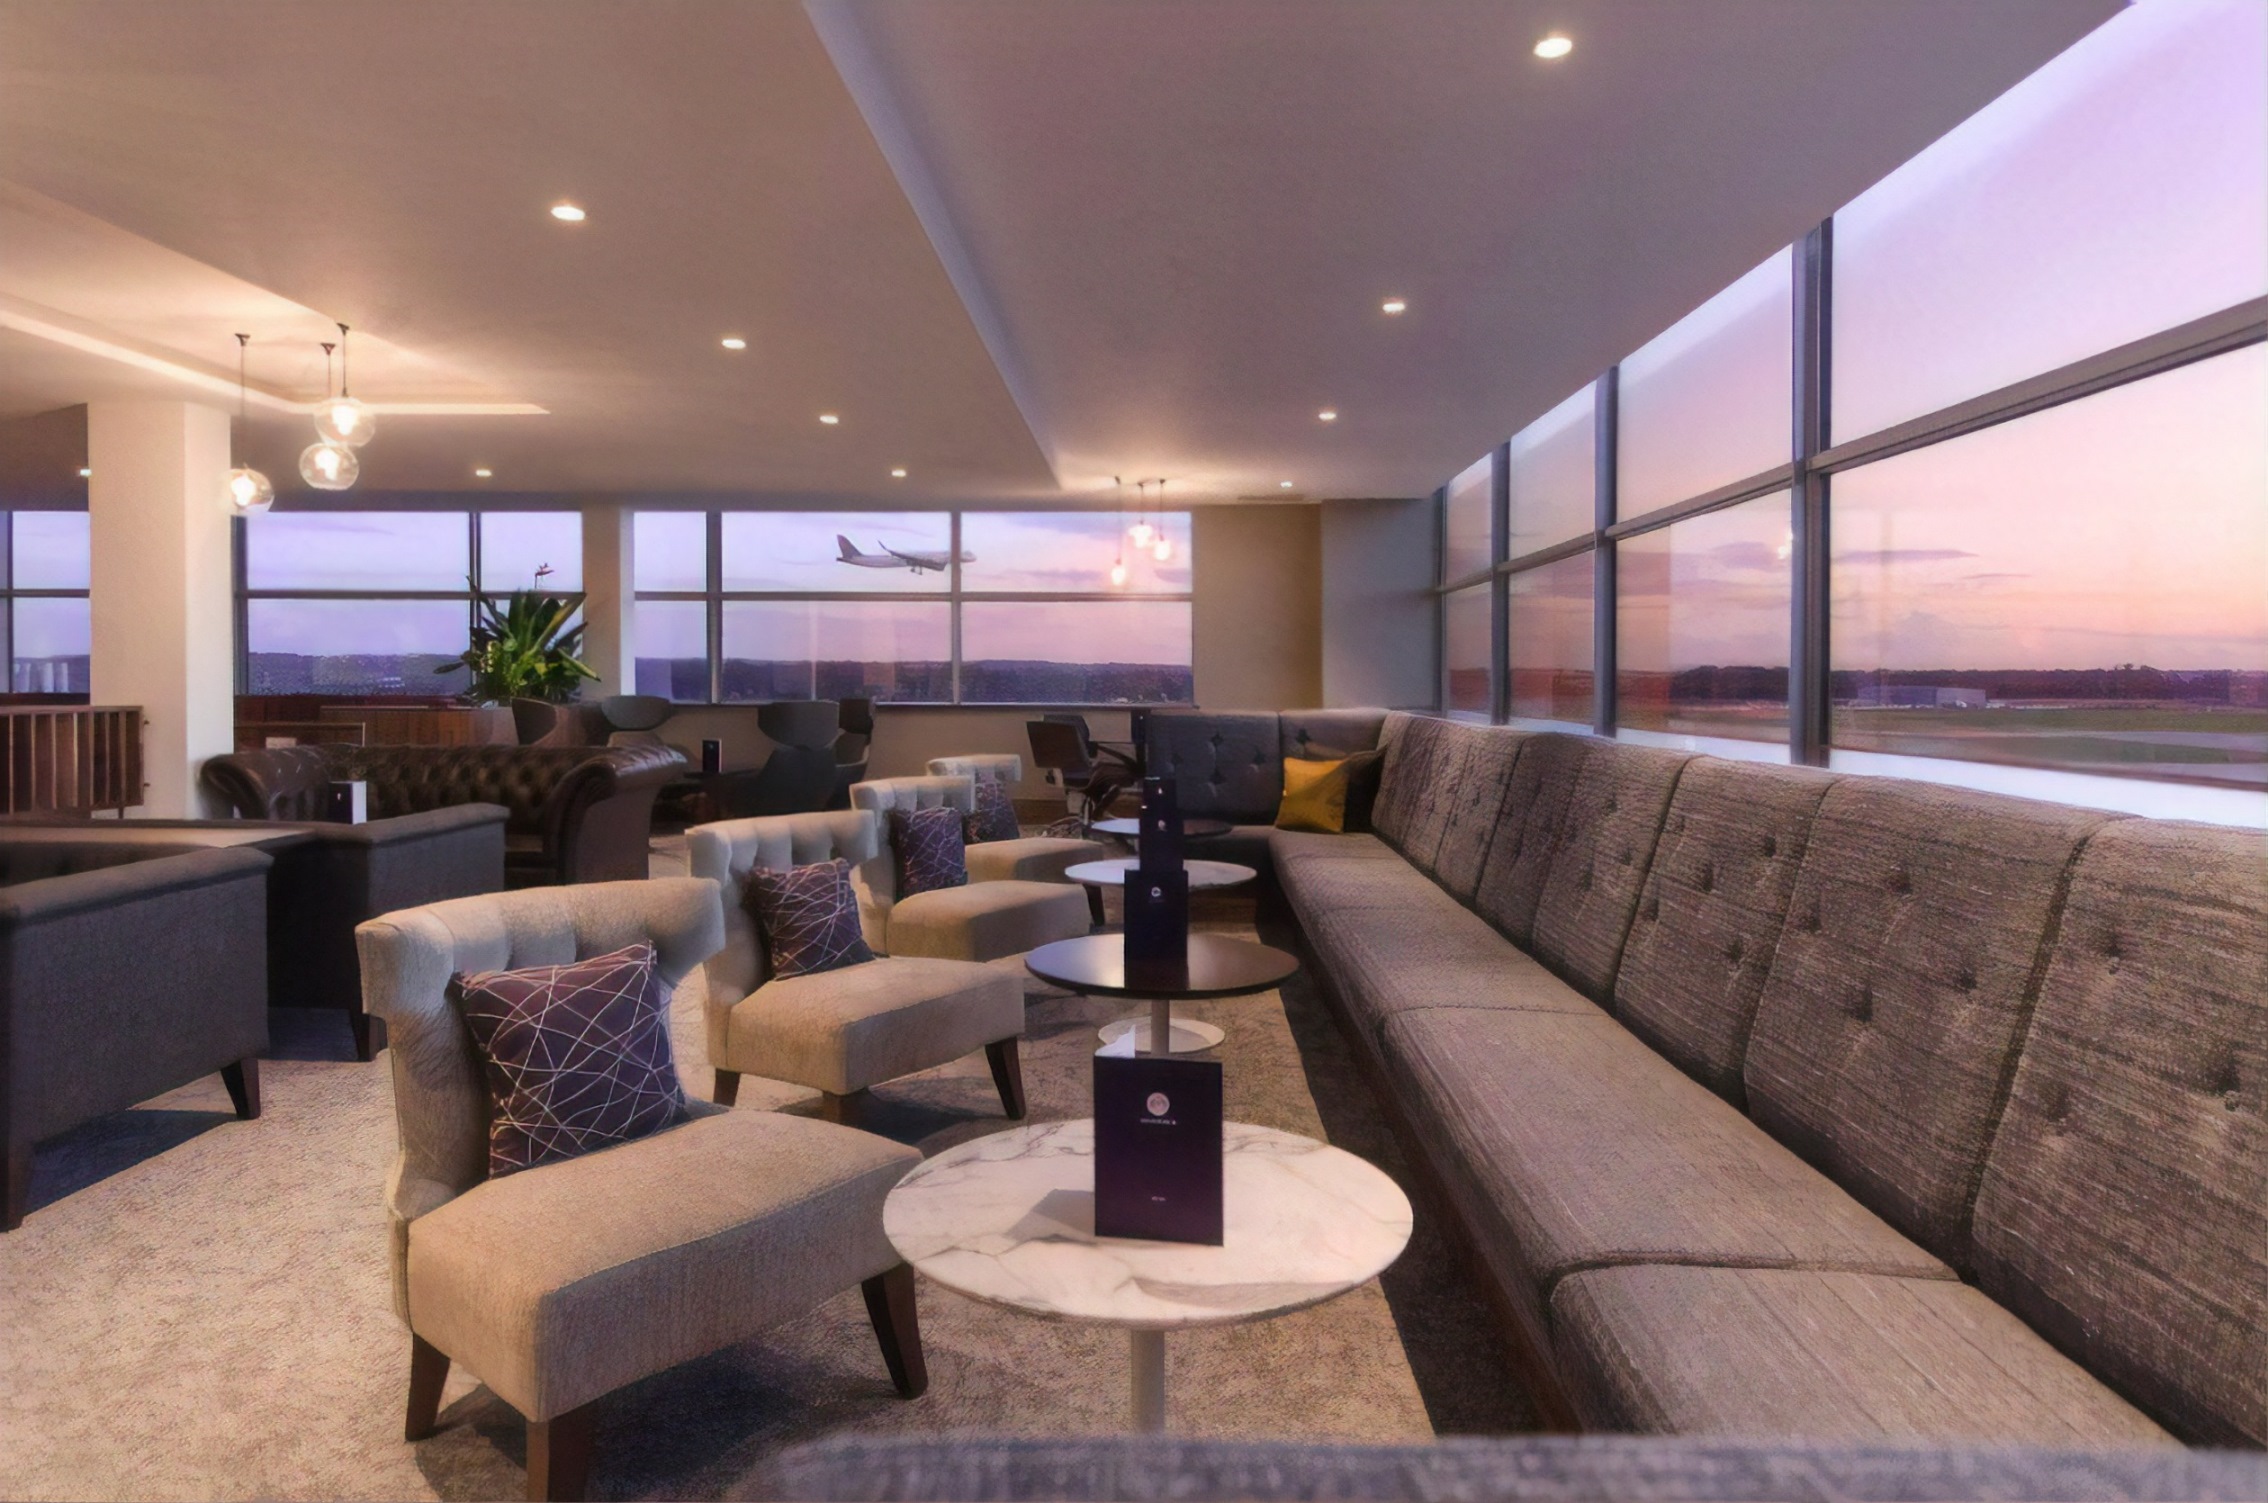 MECHANICAL SERVICES EXPERTS DELIVER FIRST CLASS SERVICE TO NEW AIRPORT LOUNGE @Ecolightinguk